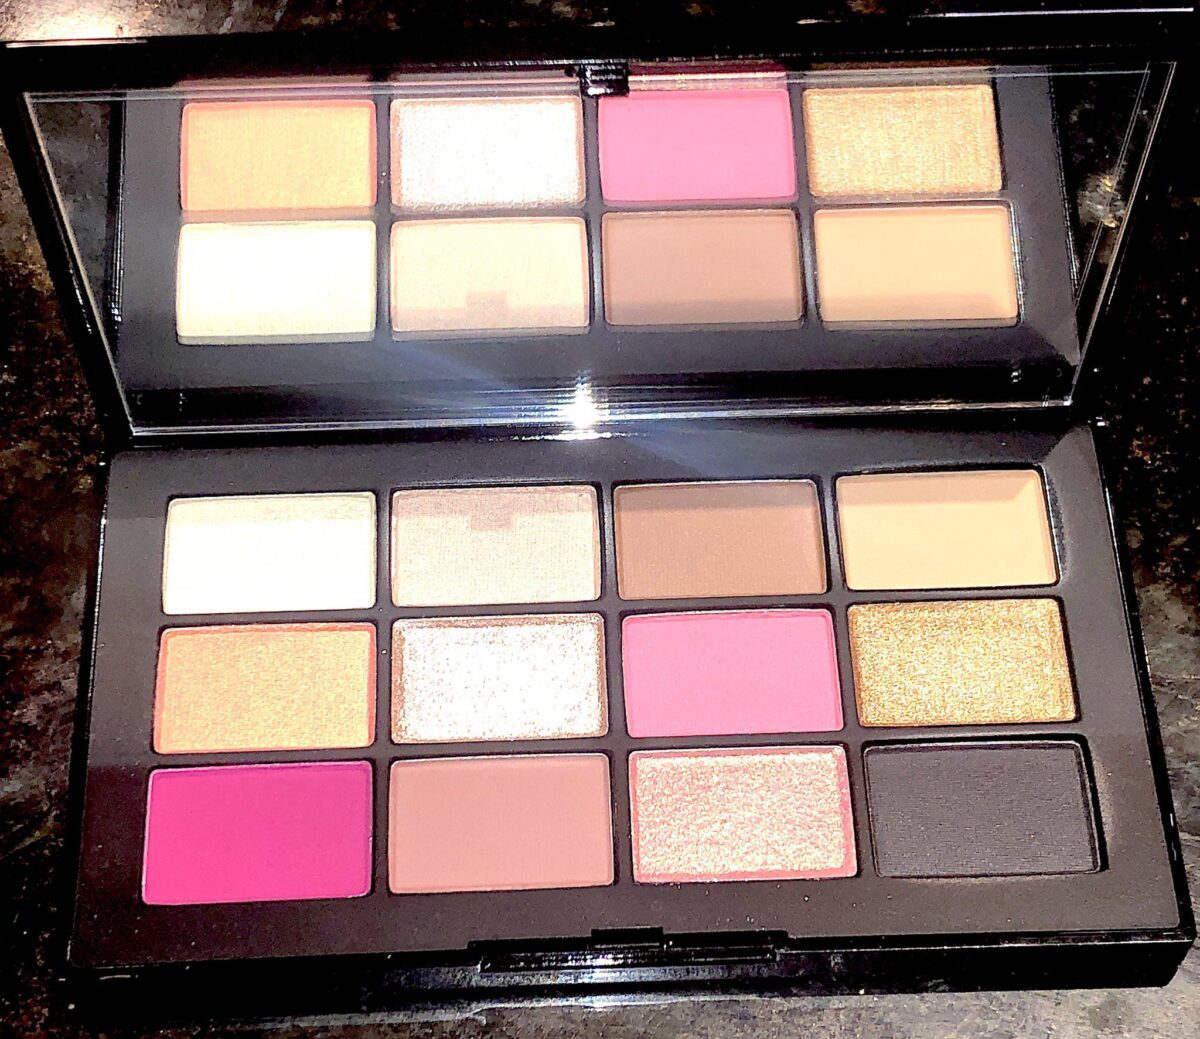 INSIDE THE NARS STUDIO 54 HOLIDAY HYPED EYESHADOW PALETTE